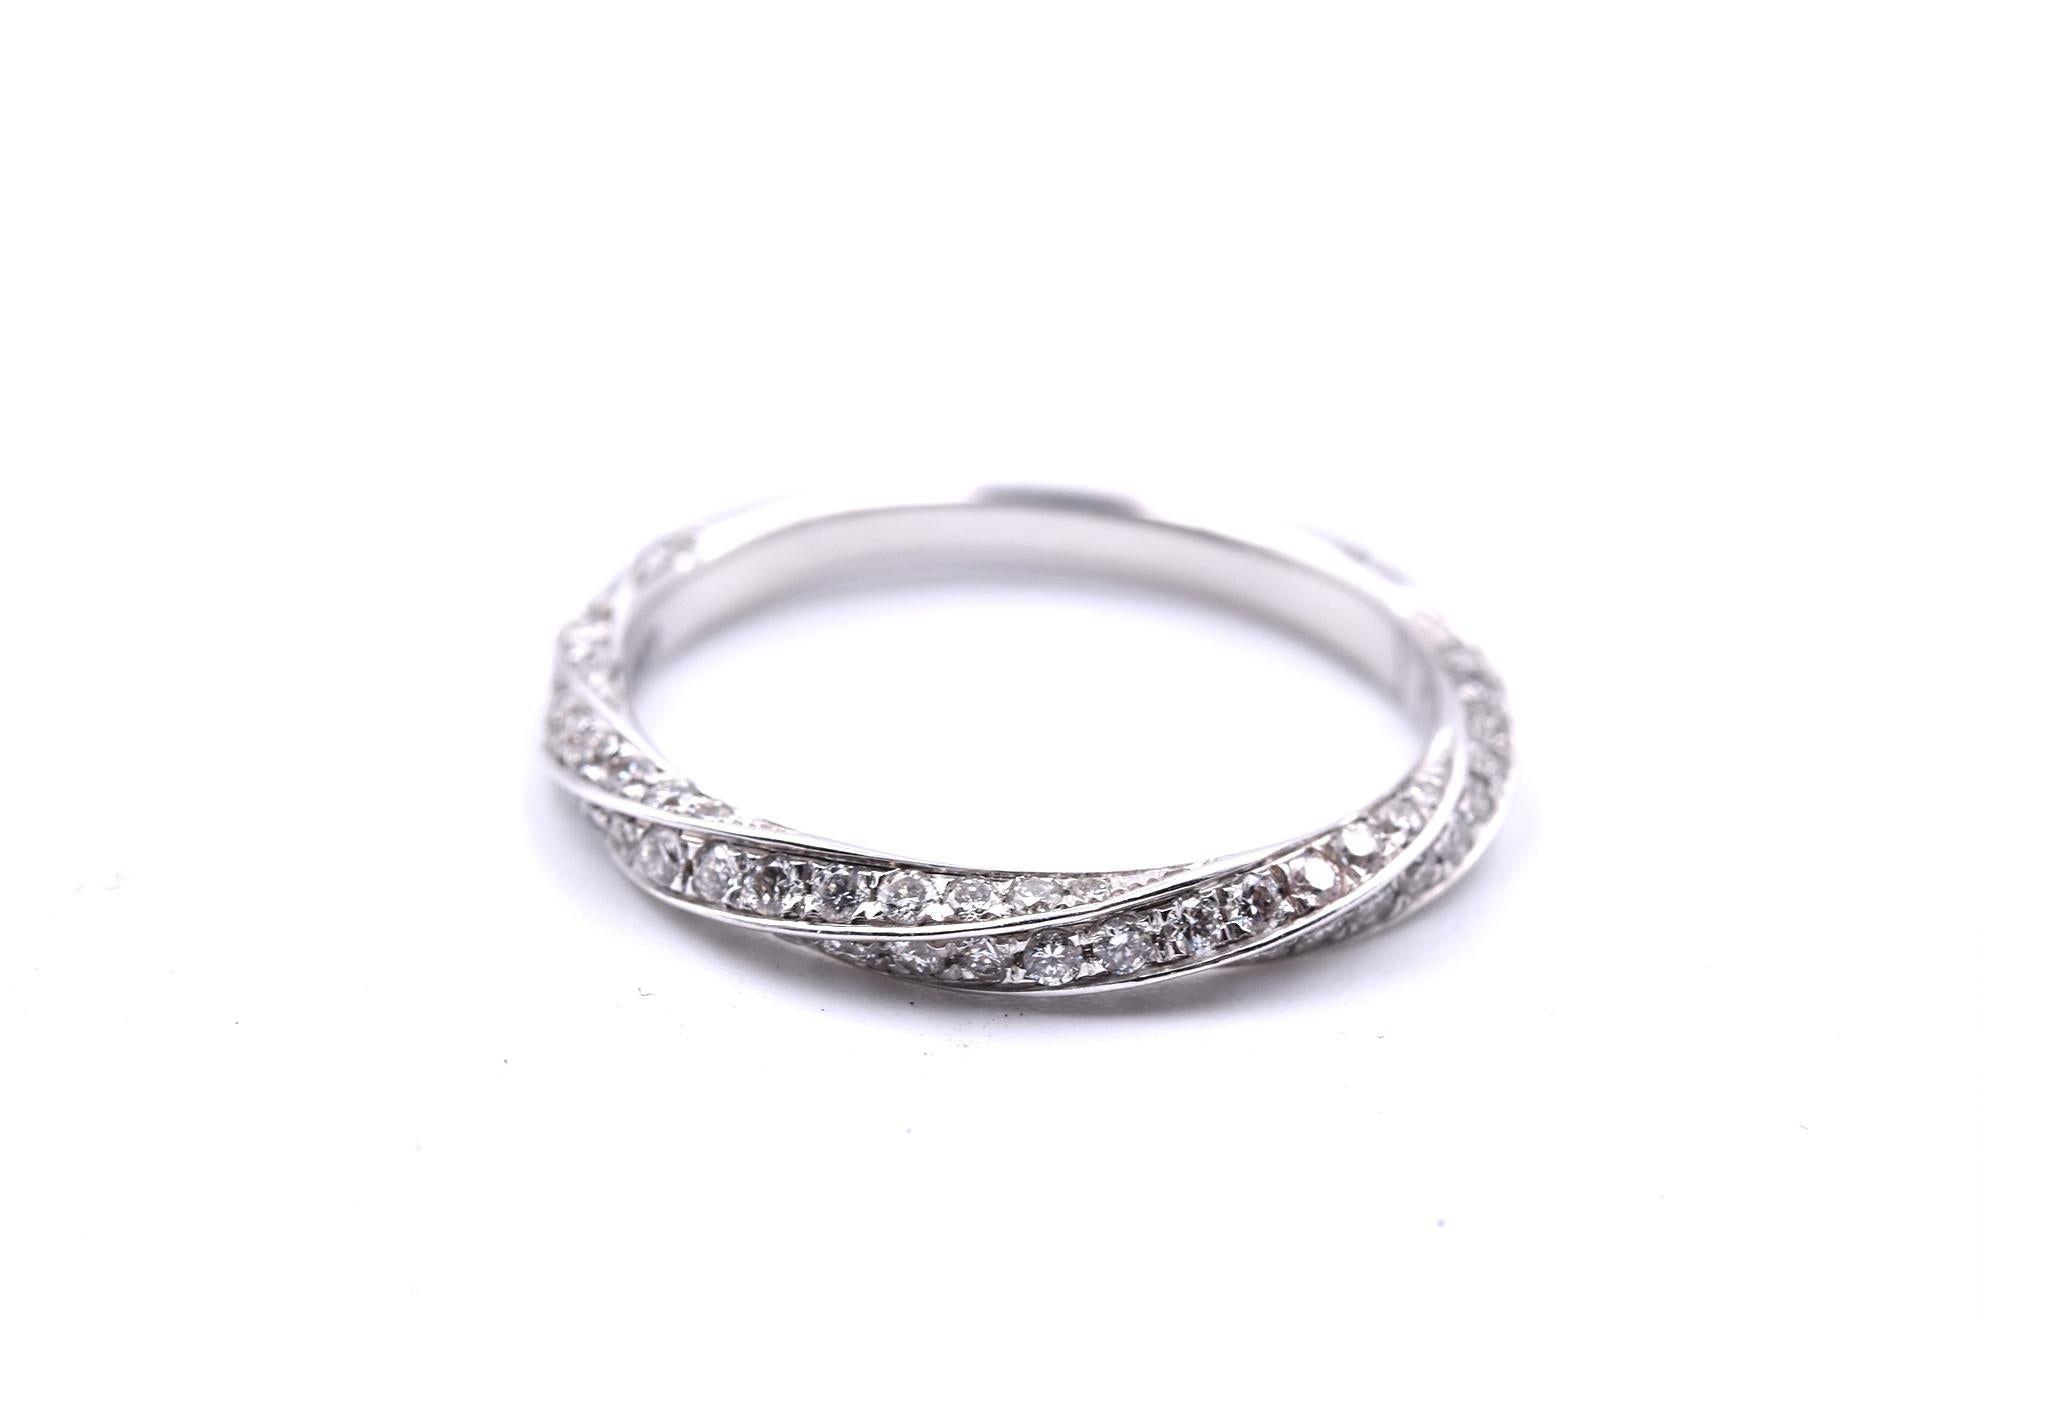 Designer: custom design
Material: 14k white gold
Diamonds: round brilliant cut =0.55cttw
Color: G
Clarity: VS
Ring size: 6 ½ (please allow two additional shipping days for sizing requests)
Dimensions: ring is approximately 2.60mm wide
Weight: 1.93